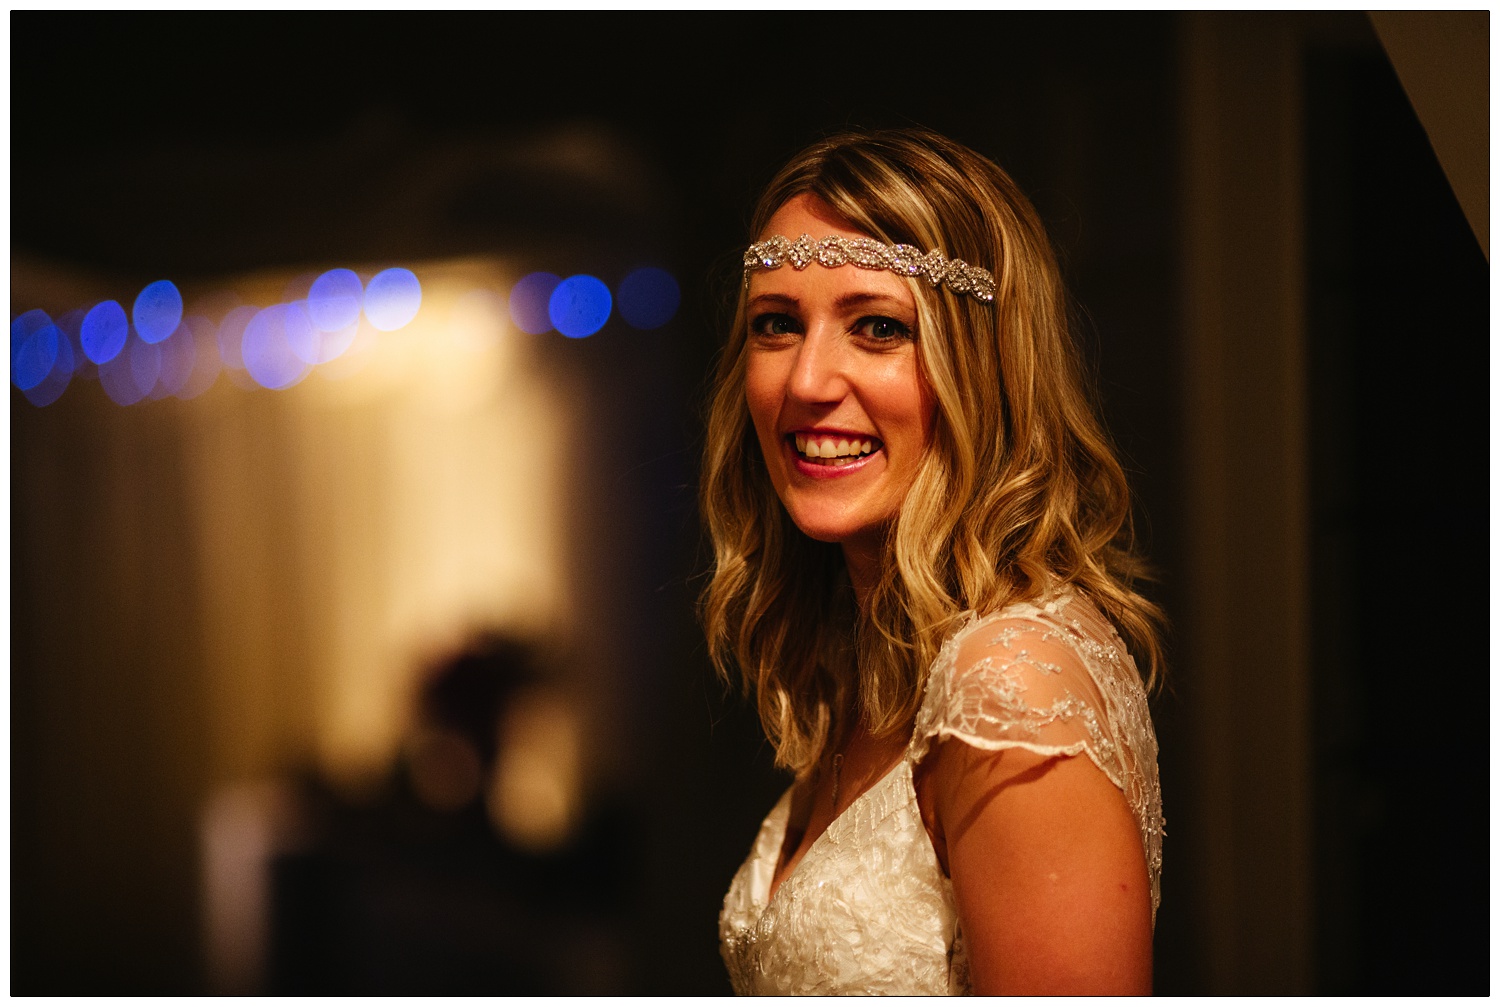 The bride is a lace dress, and a headband. It's night and lighting is orange, blue fairy lights in the background. She is smiling at the camera.